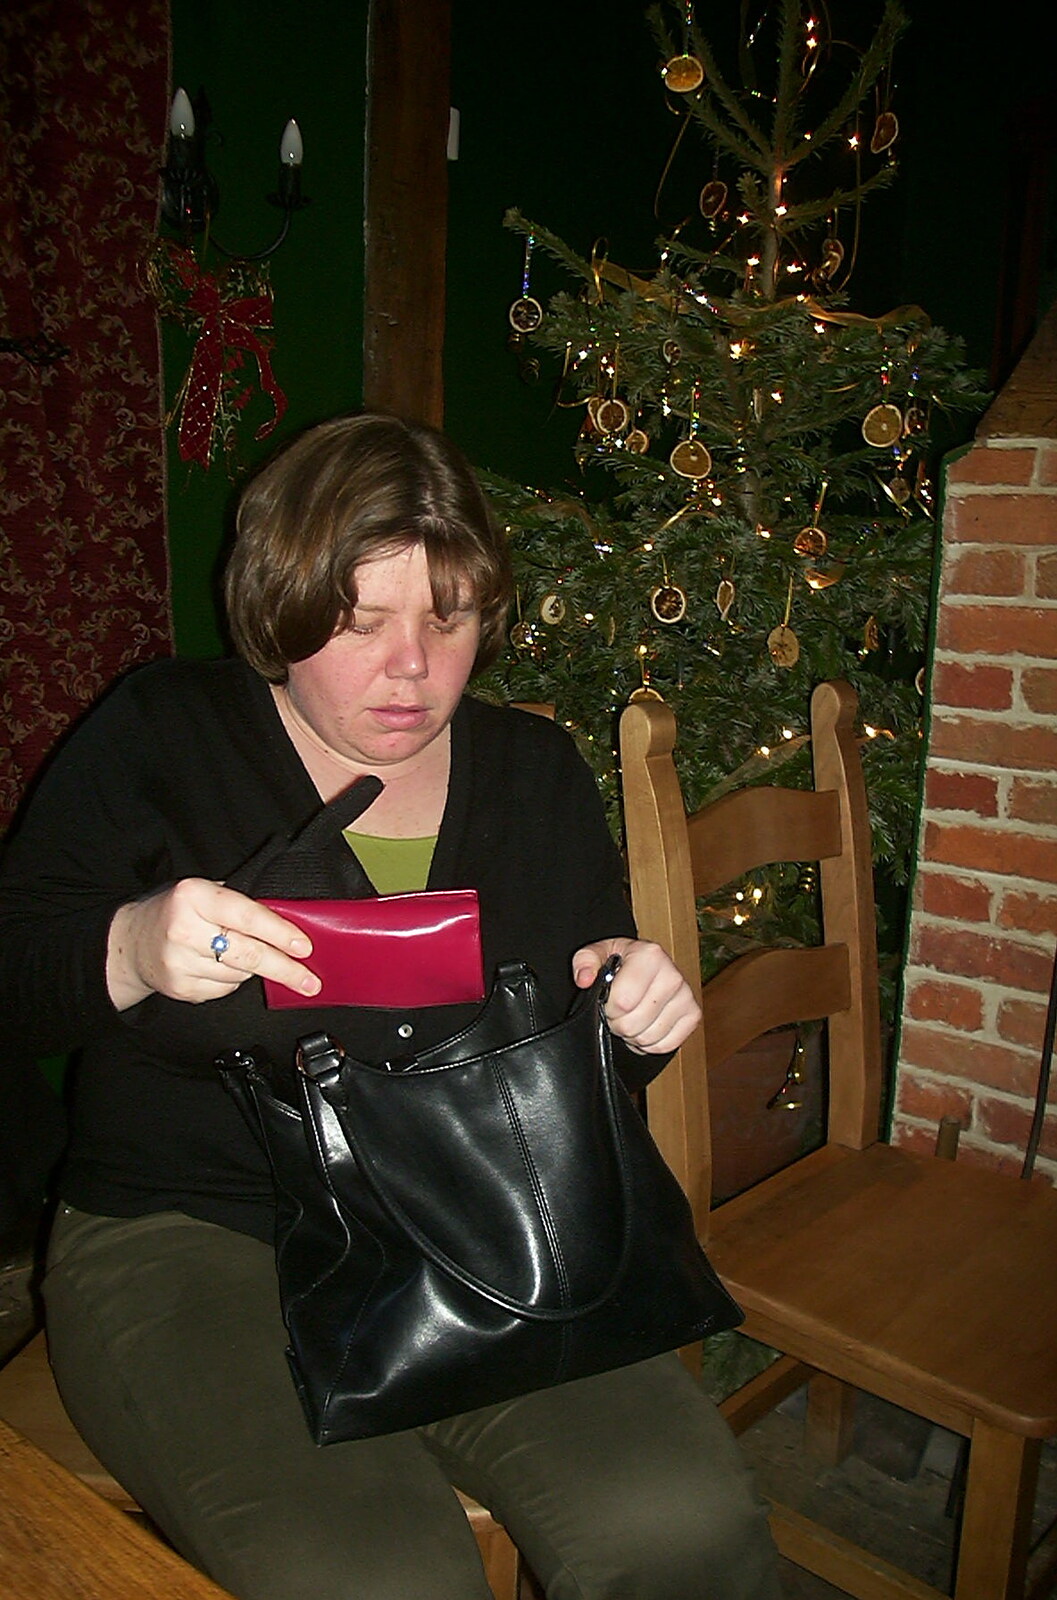 Sis hauls her purse out from The House in Snow and a Carburettor, Brome, Suffolk - 20th December 2002